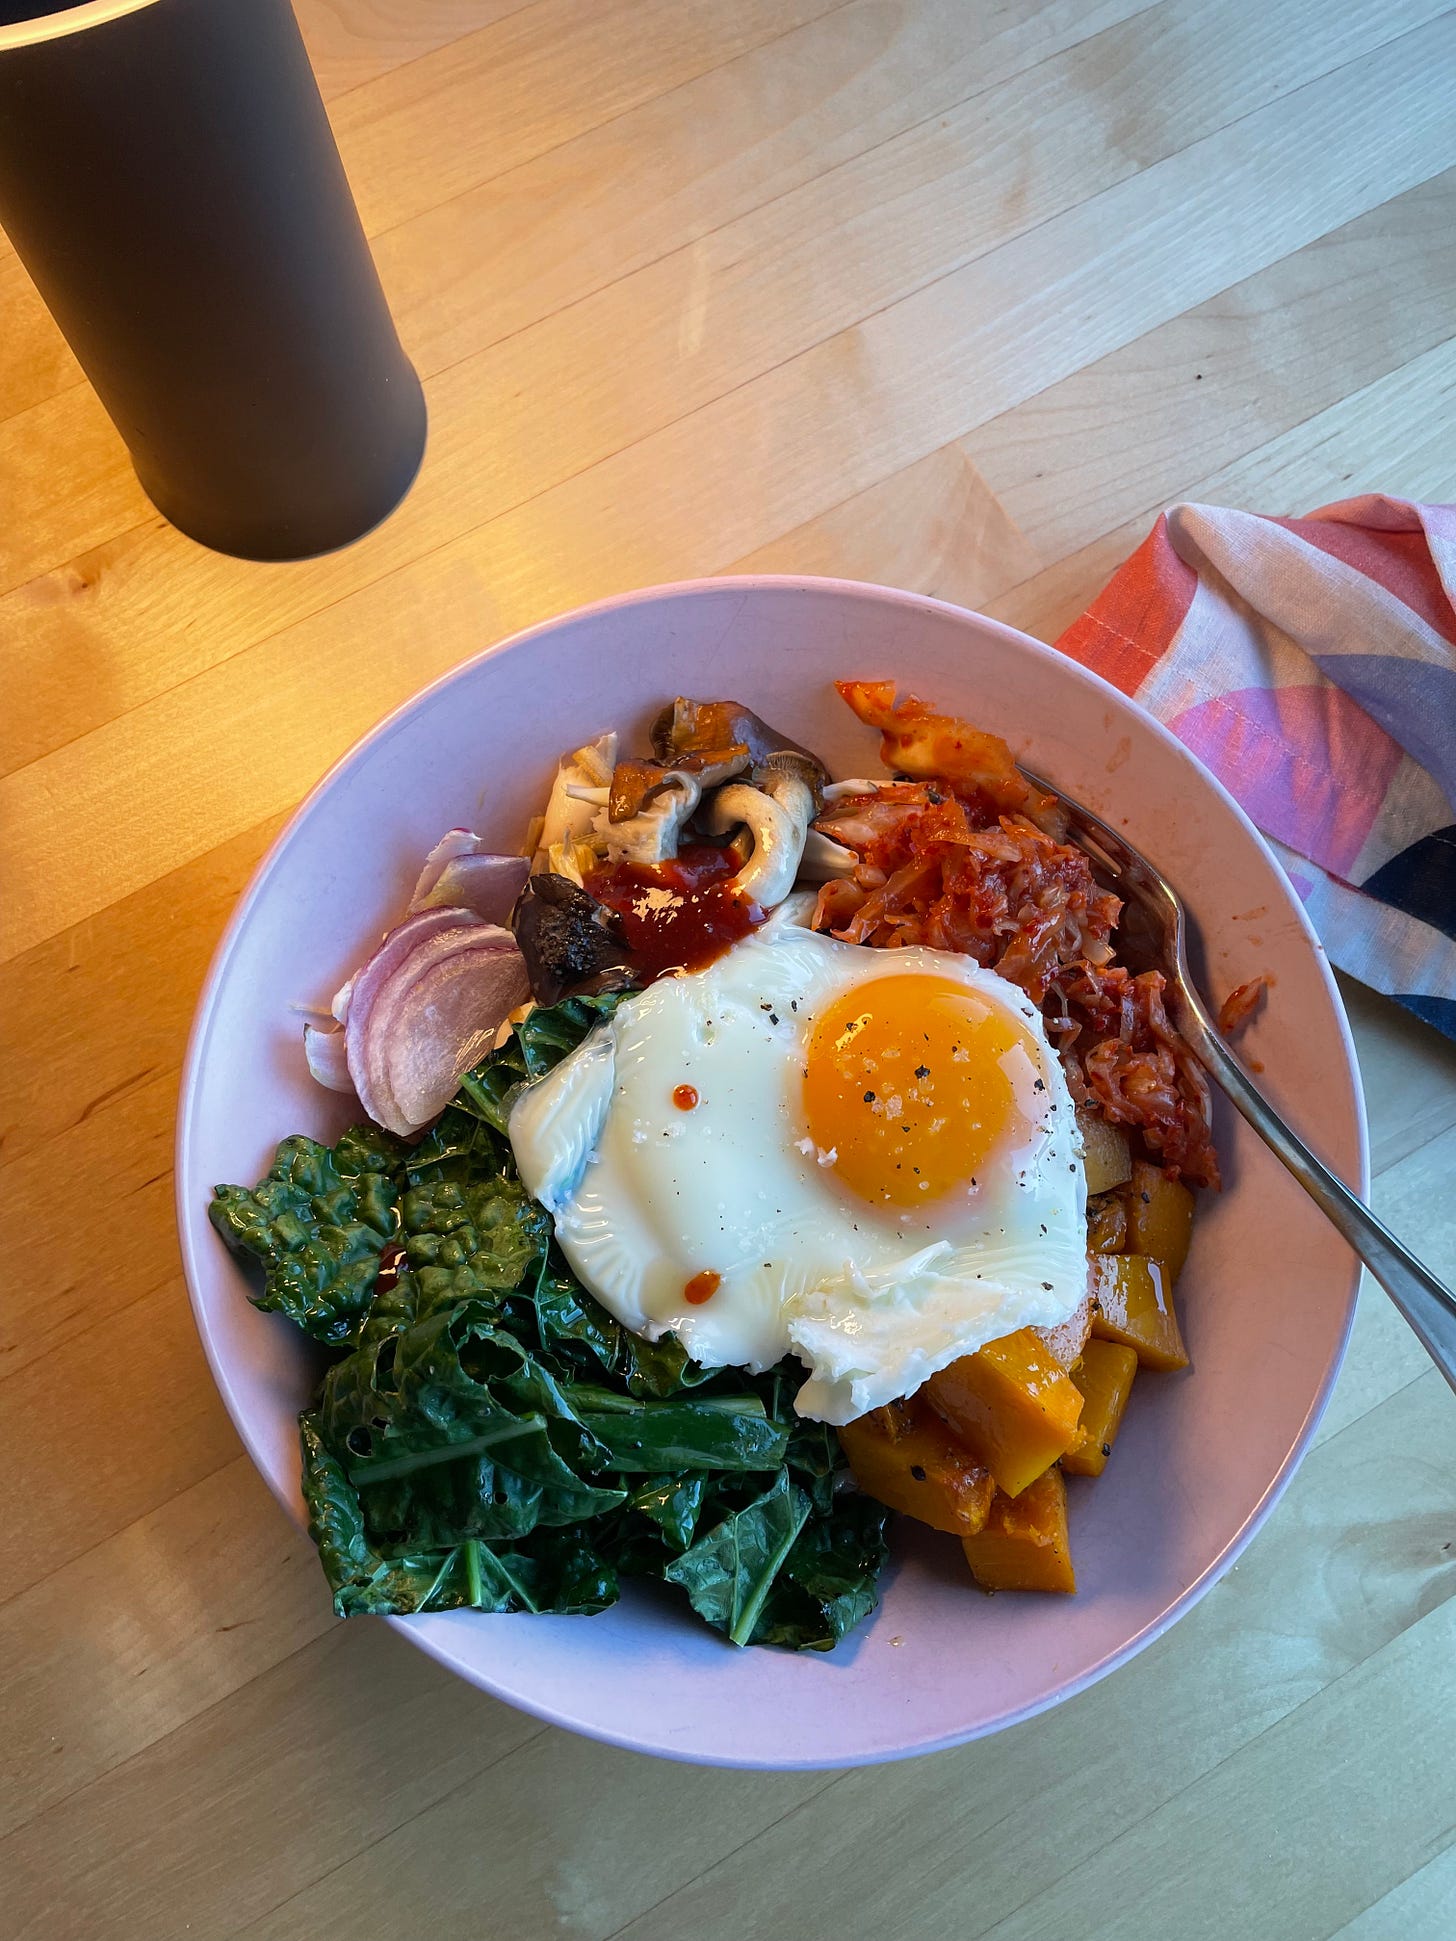 Pink bowl with roasted pumpkin, kale, red onion, served with a roasted egg and kimchi.